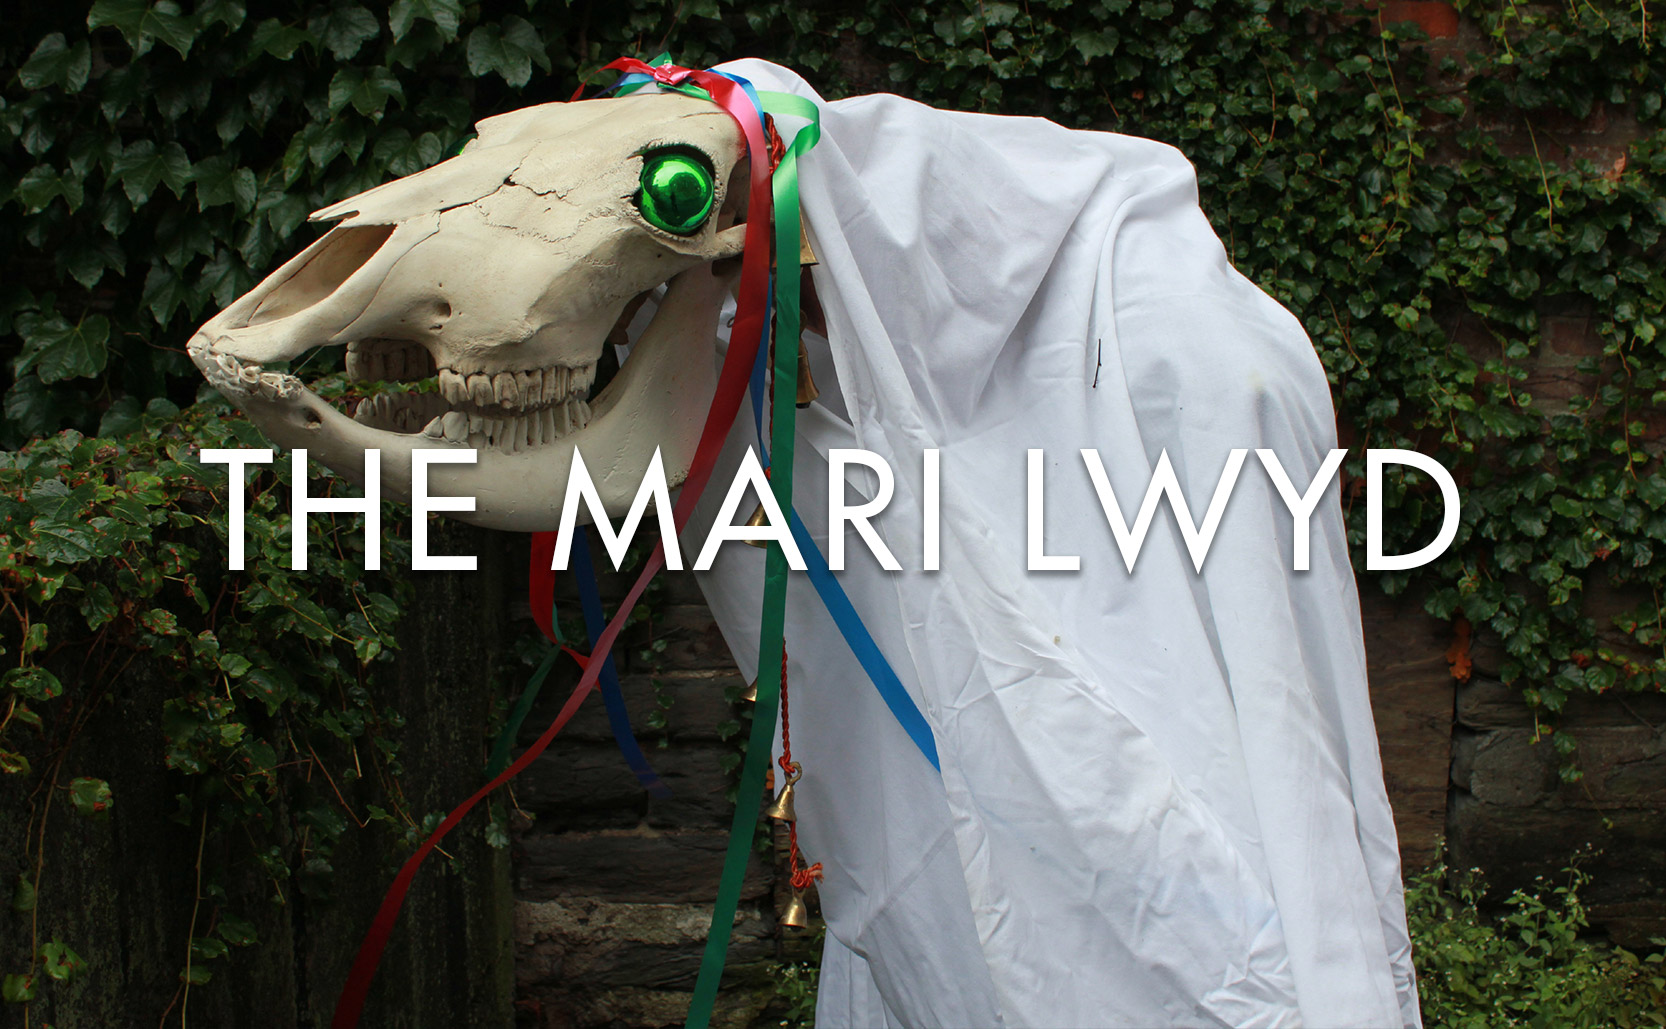 You are currently viewing The Mari Lwyd